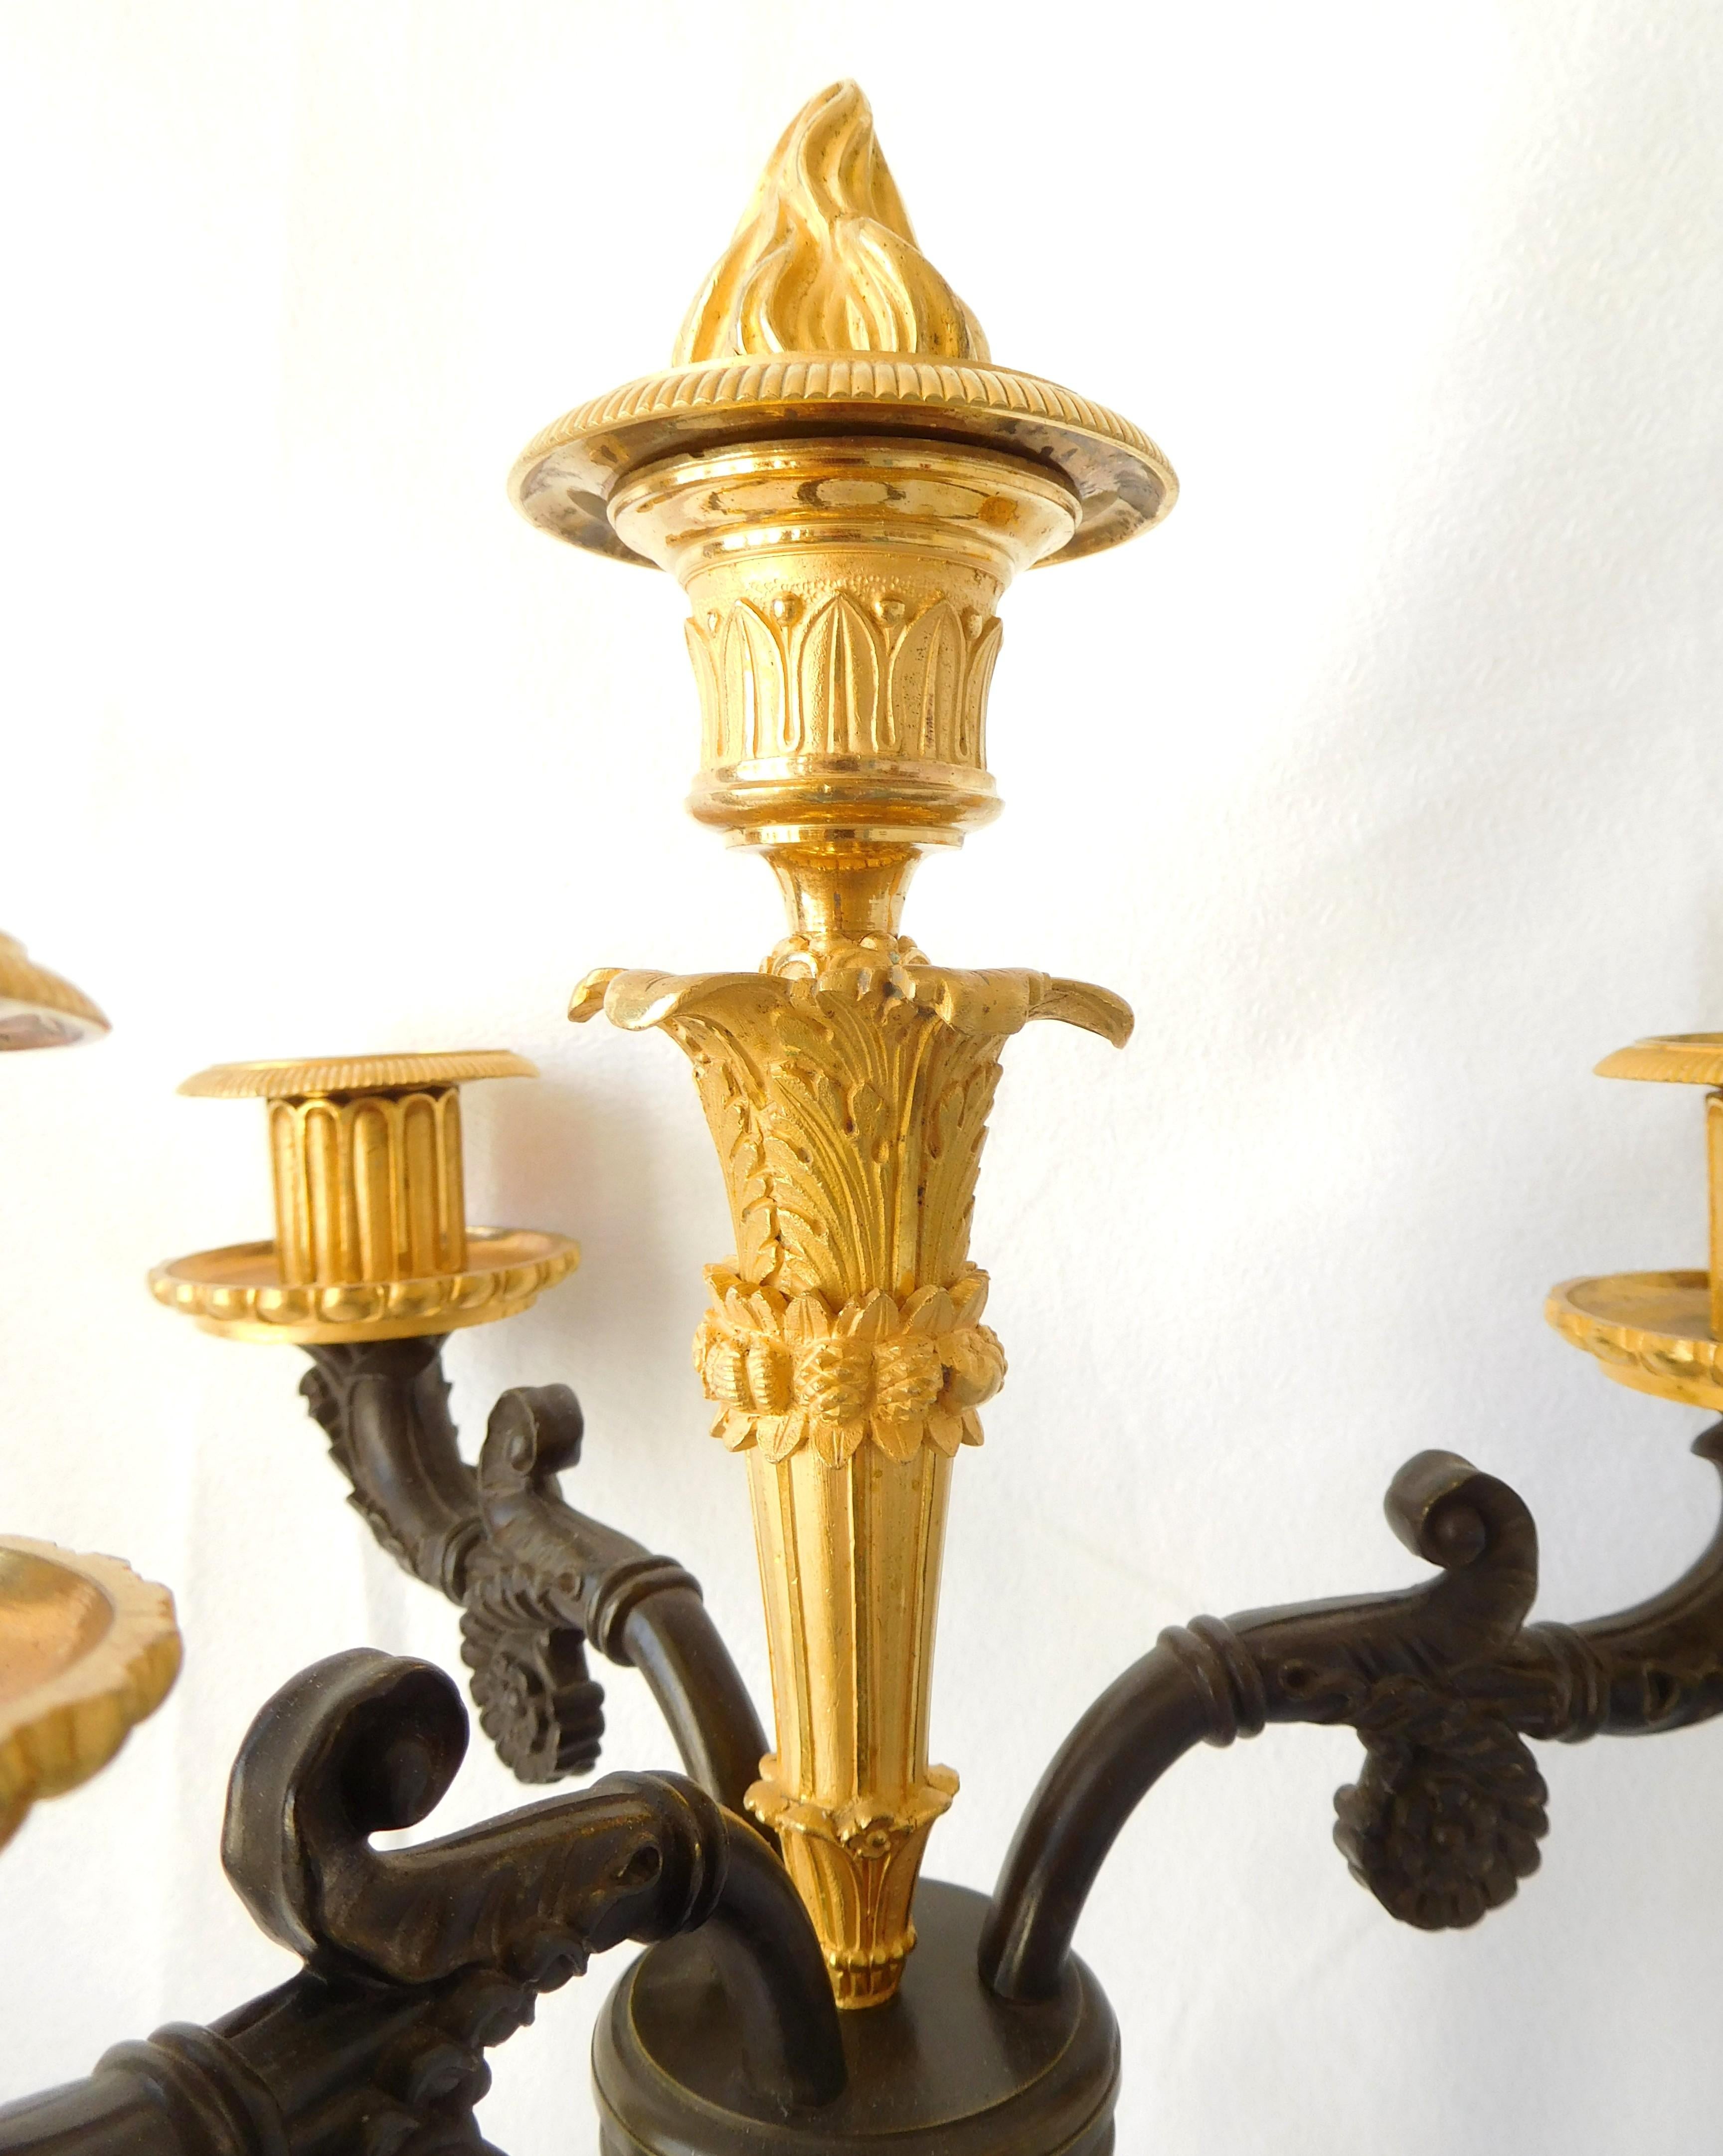 Pair of Tall Empire Ormolu & Bronze Candelabras Attributed to Gerard Jean Galle For Sale 10